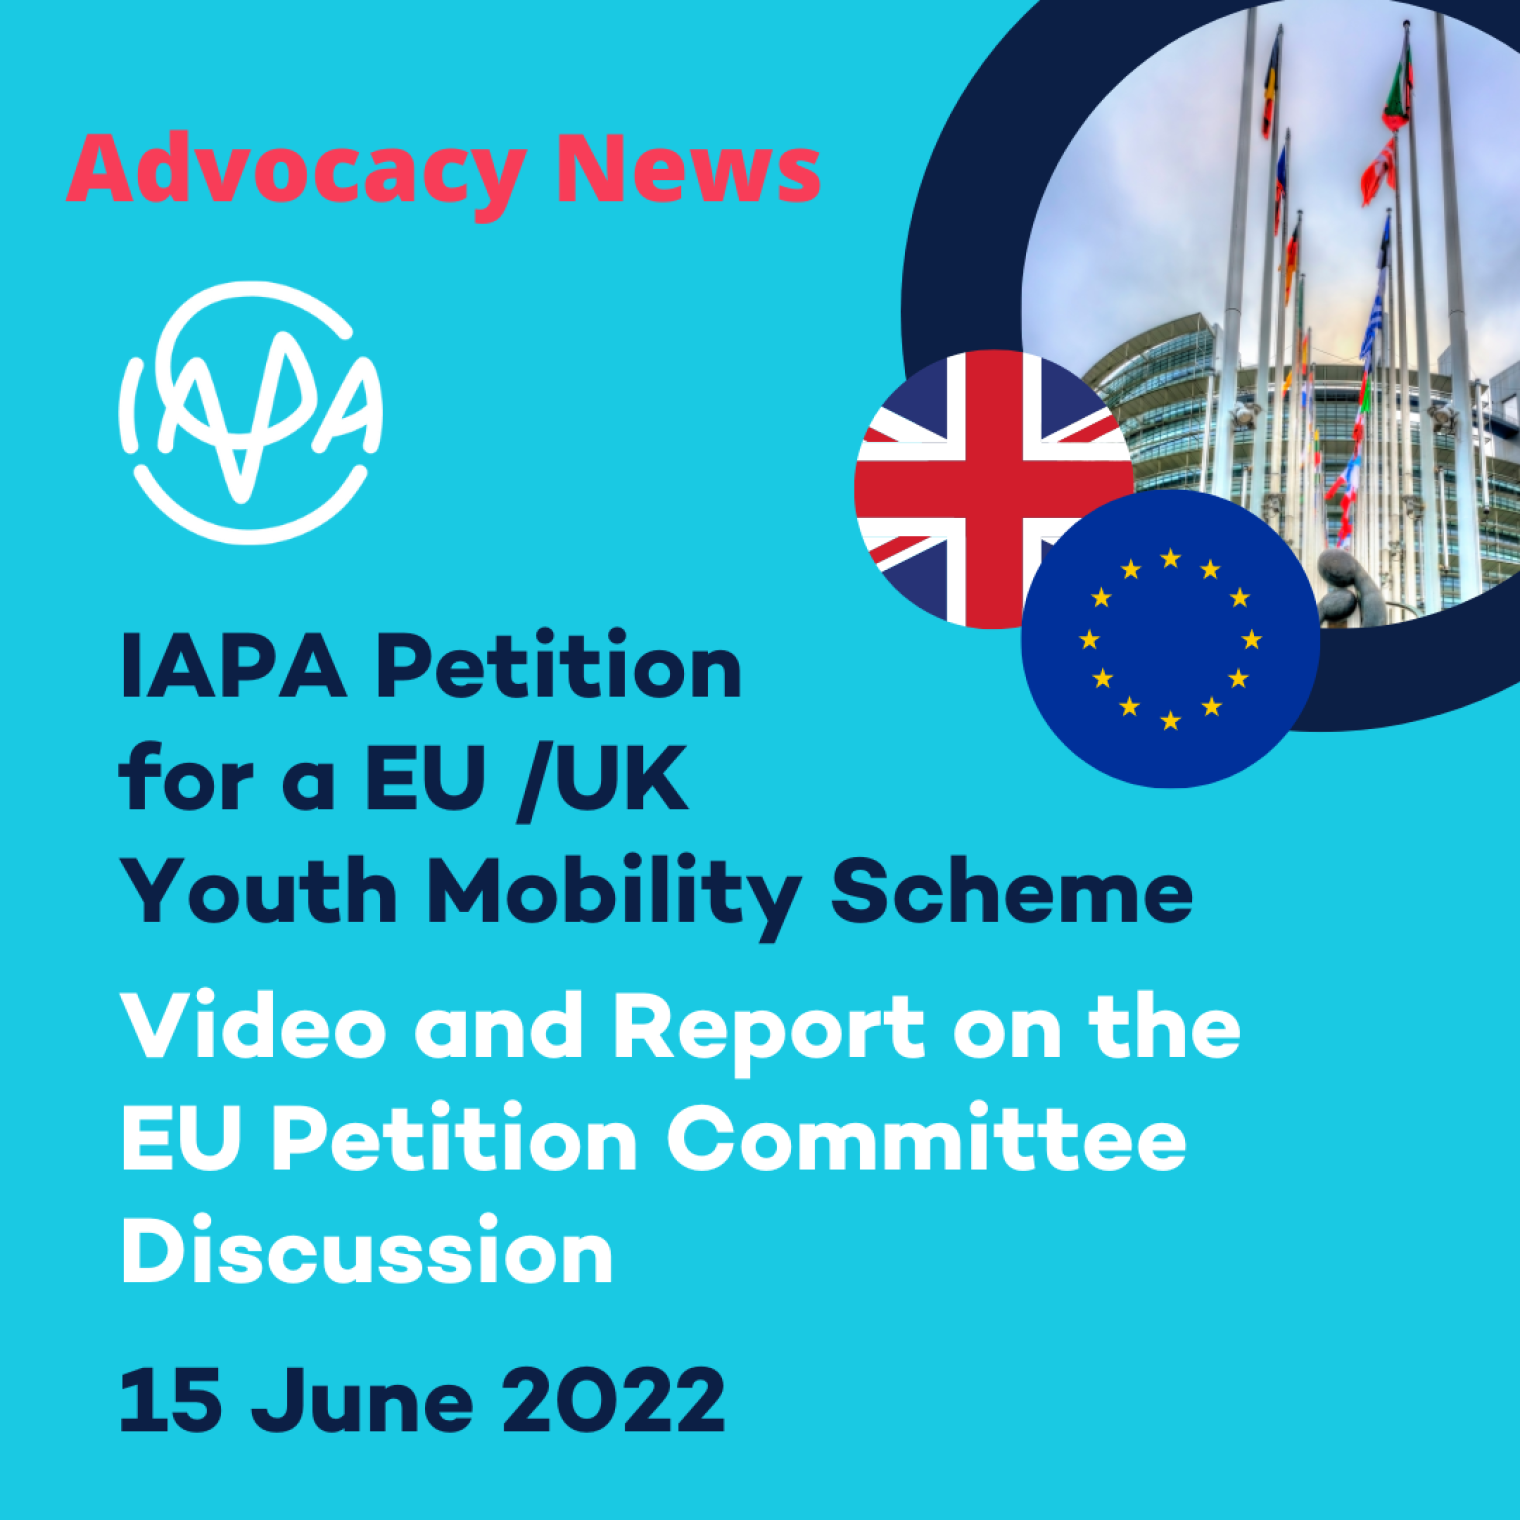 Report and video: EU Petition Committee discussion – 15 June 22